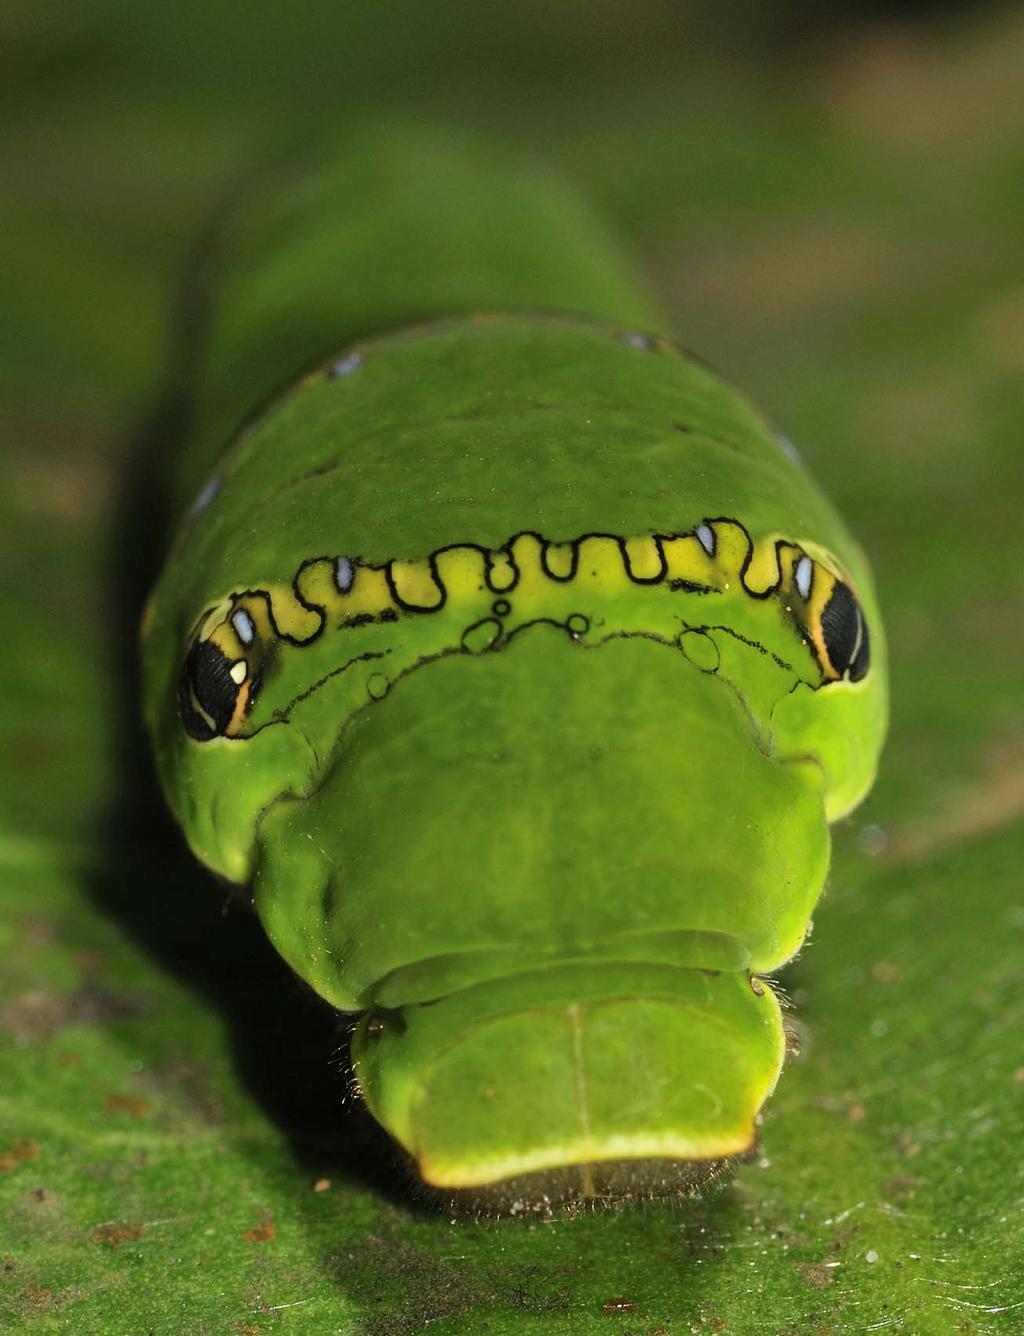 Left, a close-up portrait of a caterpillar of the Common Mormon butterfly